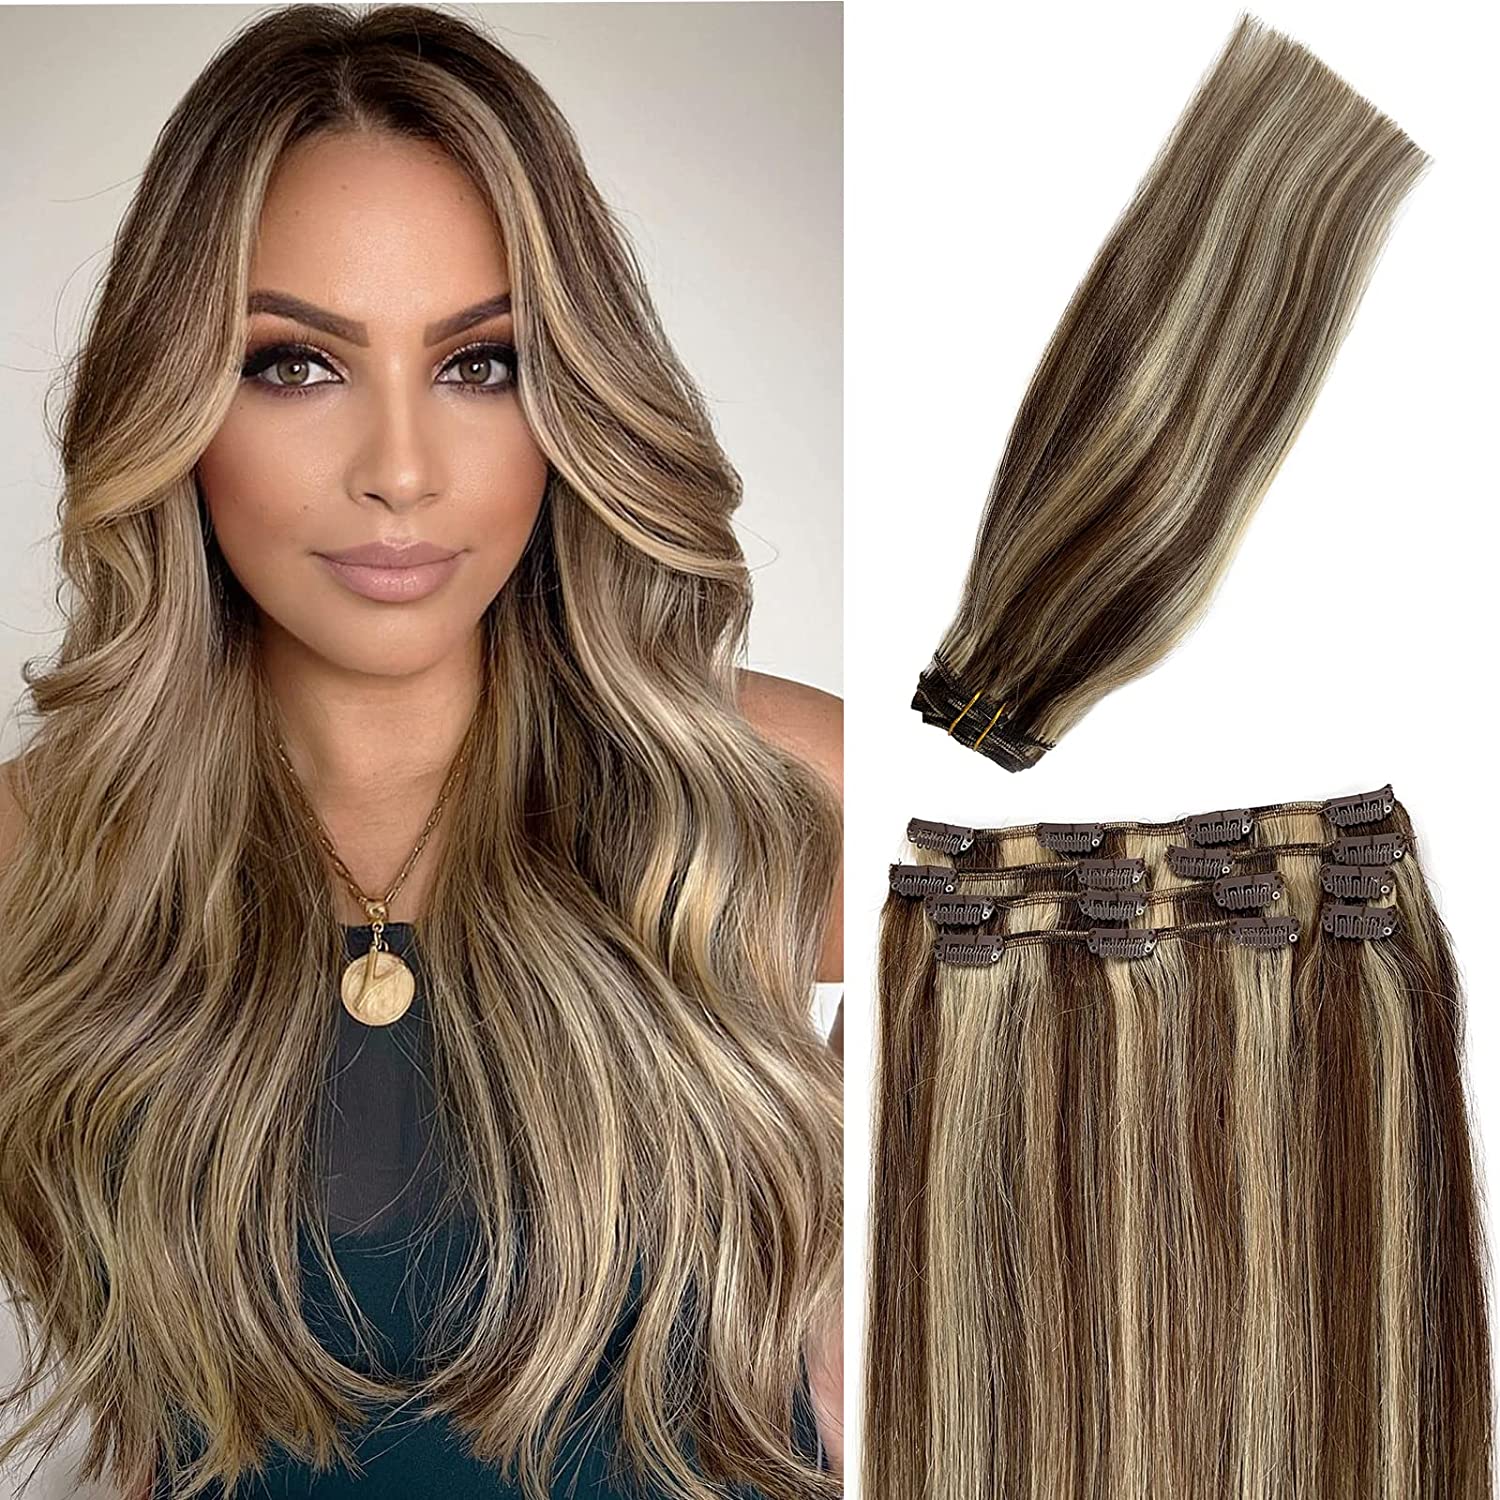 VARIO Hair Remy Clip in Hair Extensions Blonde Balayage 70grams 15 Short  Straight Human Hair Extensions Clips in Medium Brown to Bleach Blonde